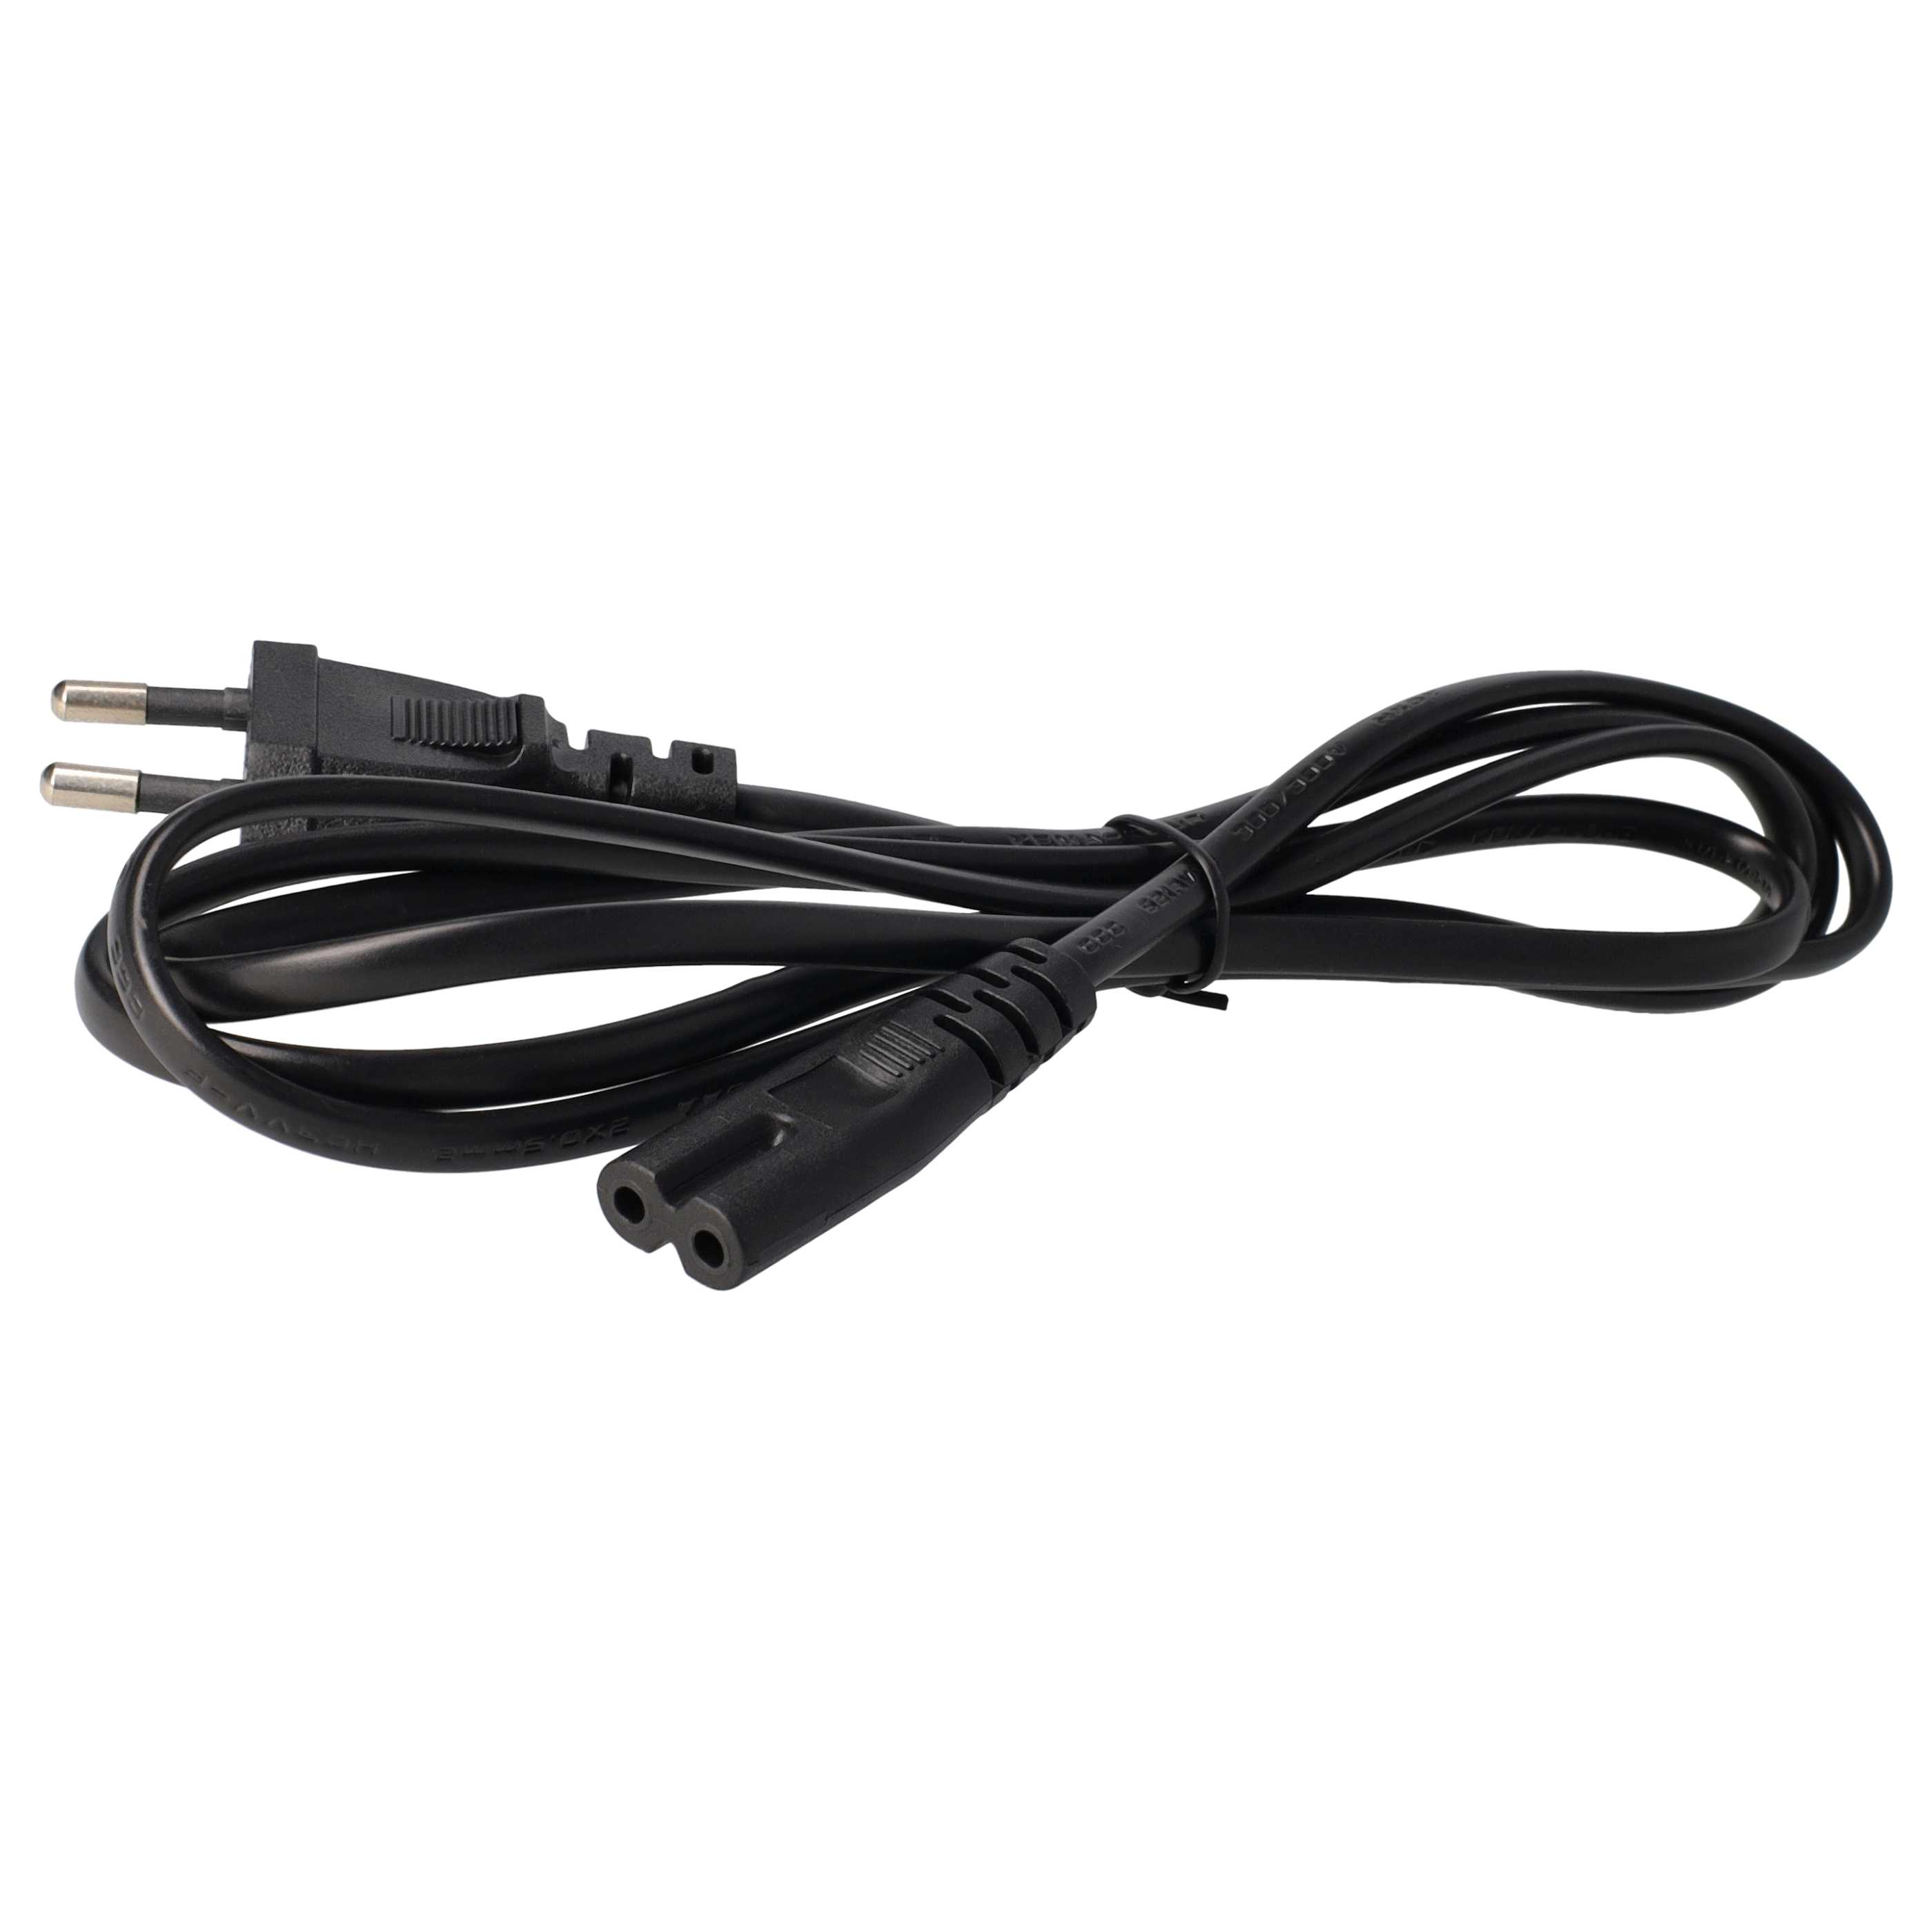 Mains Power Adapter replaces Asus ADP-45AW for AsusNotebook, 45 W